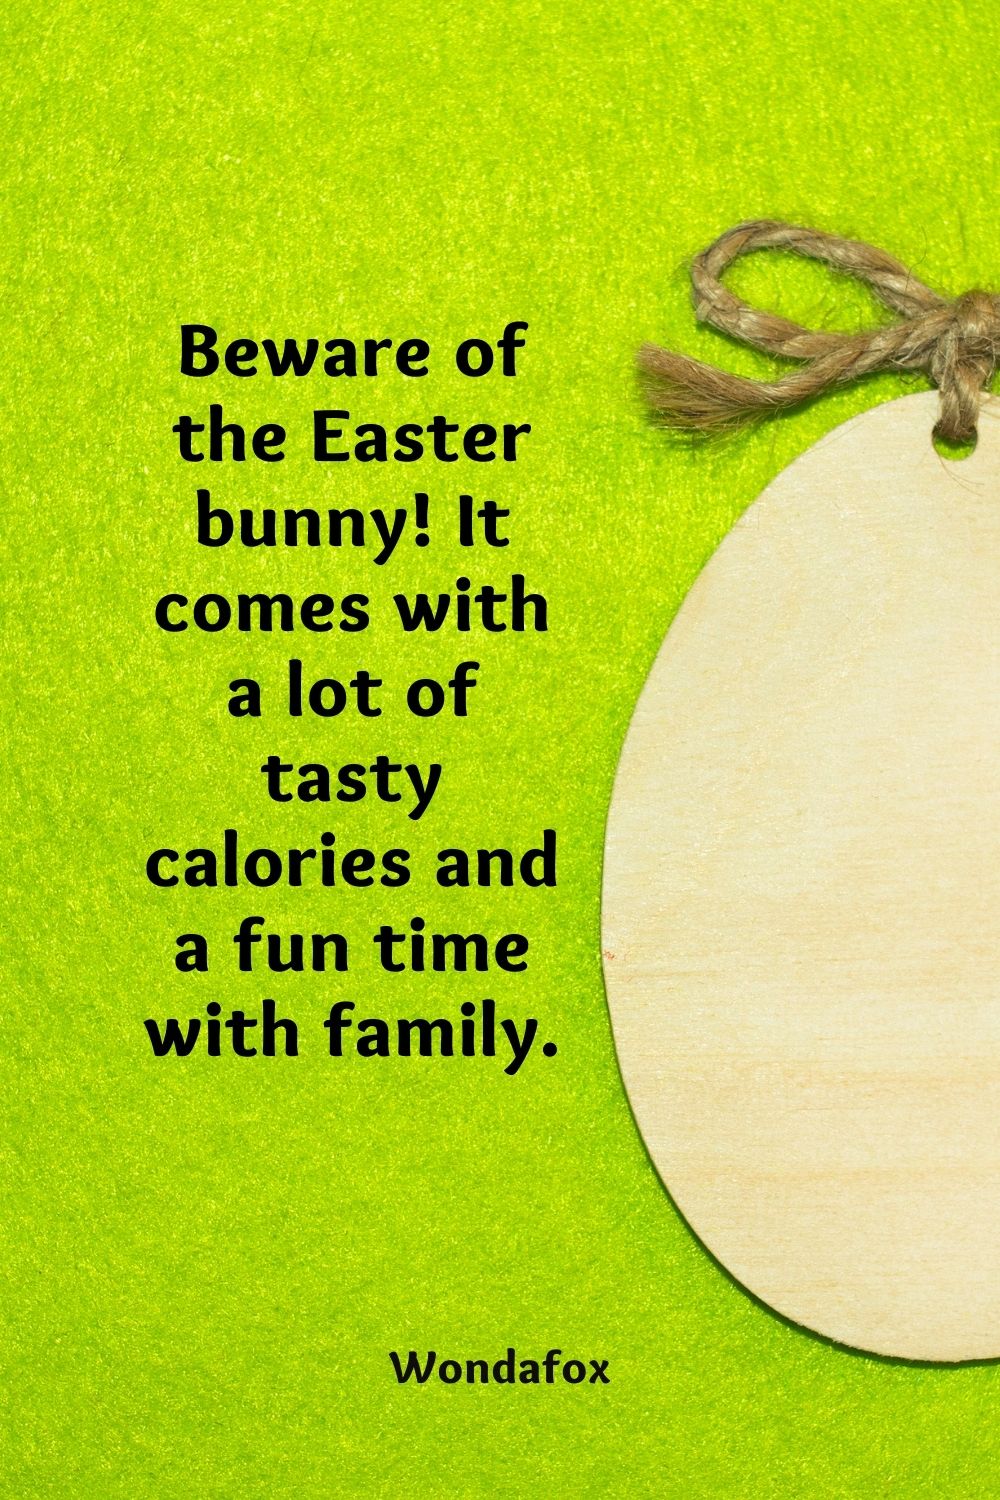 Beware of the Easter bunny! It comes with a lot of tasty calories and a fun time with family.